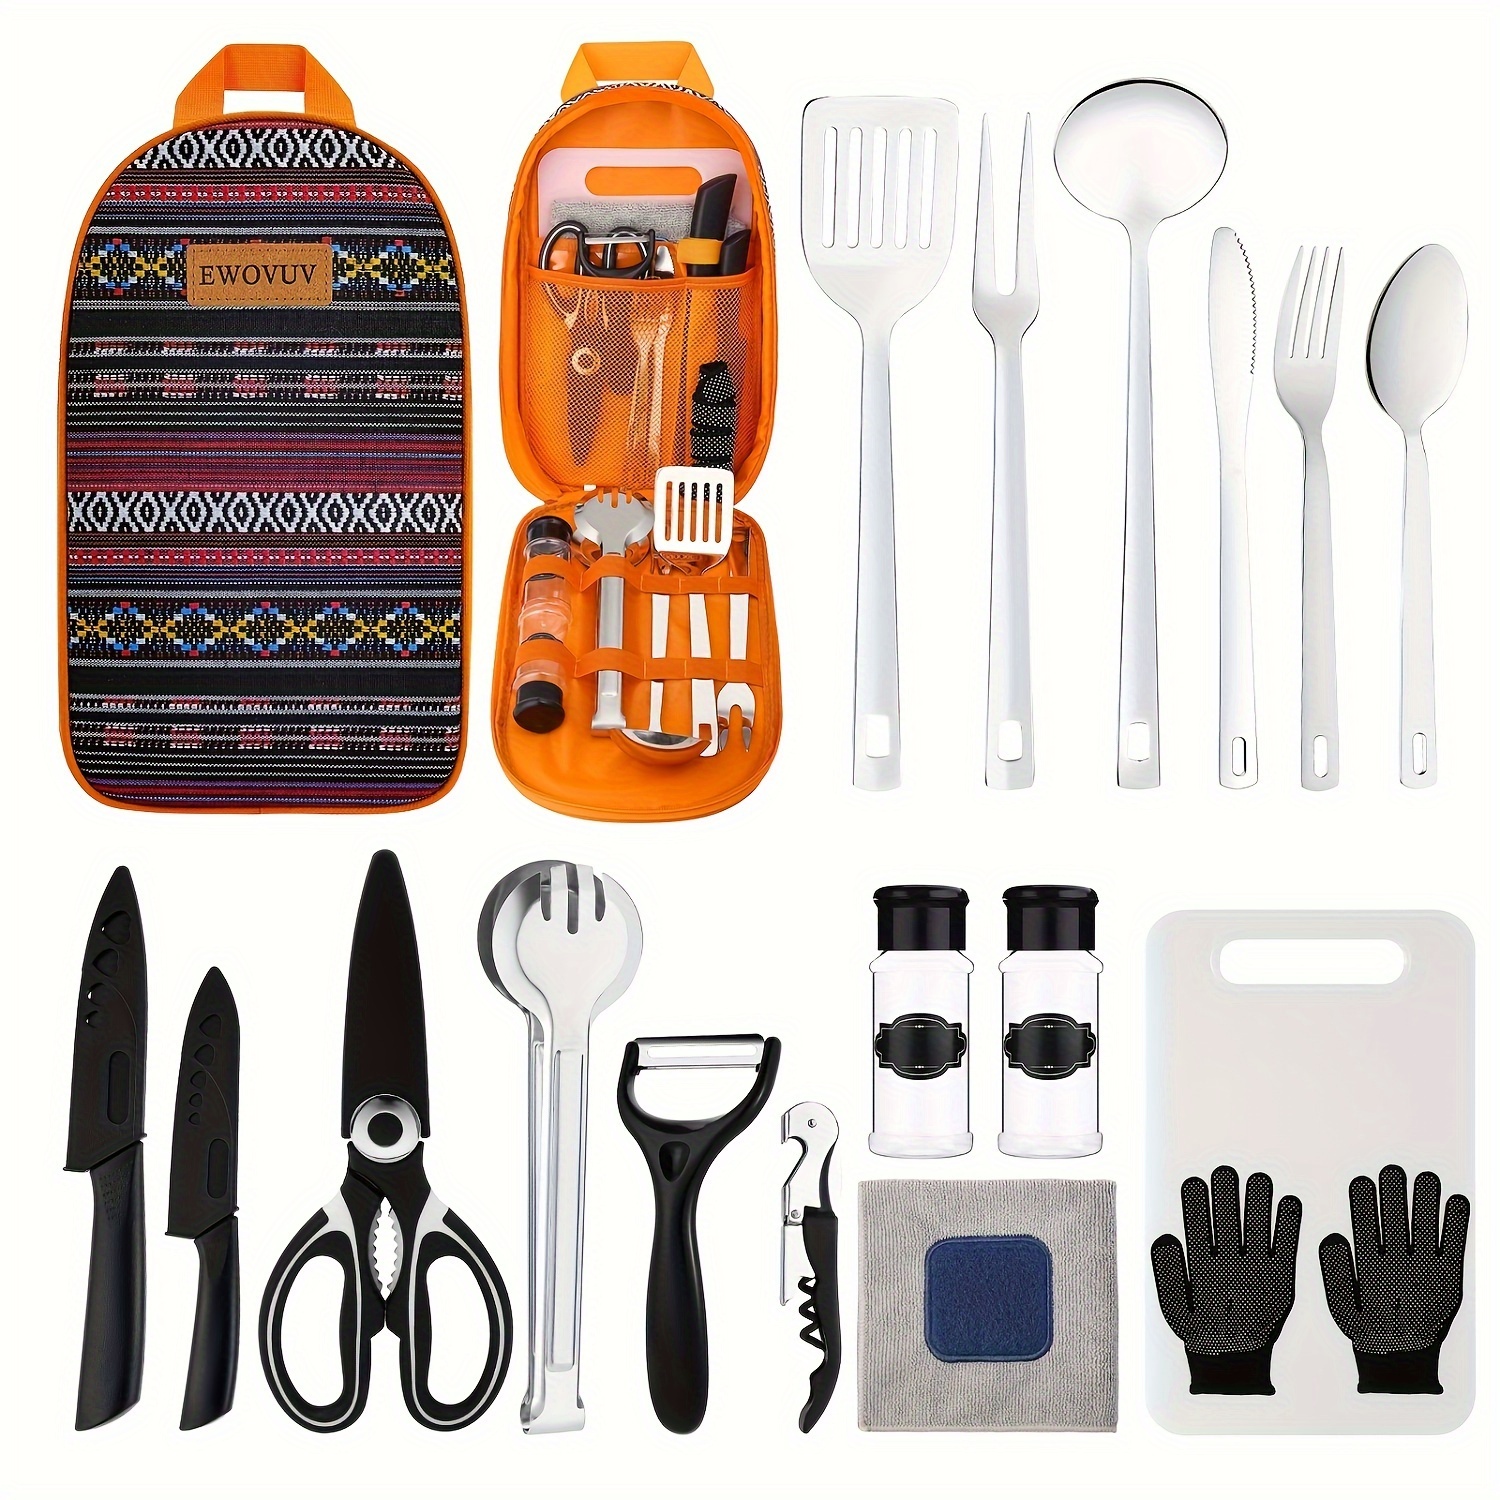 

Camping Cookware Sets Camping Essentials Cookware Accessories Gear Camping Tents Camp Kitchen Rv Gadgets Outdoor Stoves Portable Picnic Gifts Barbecue Stuff